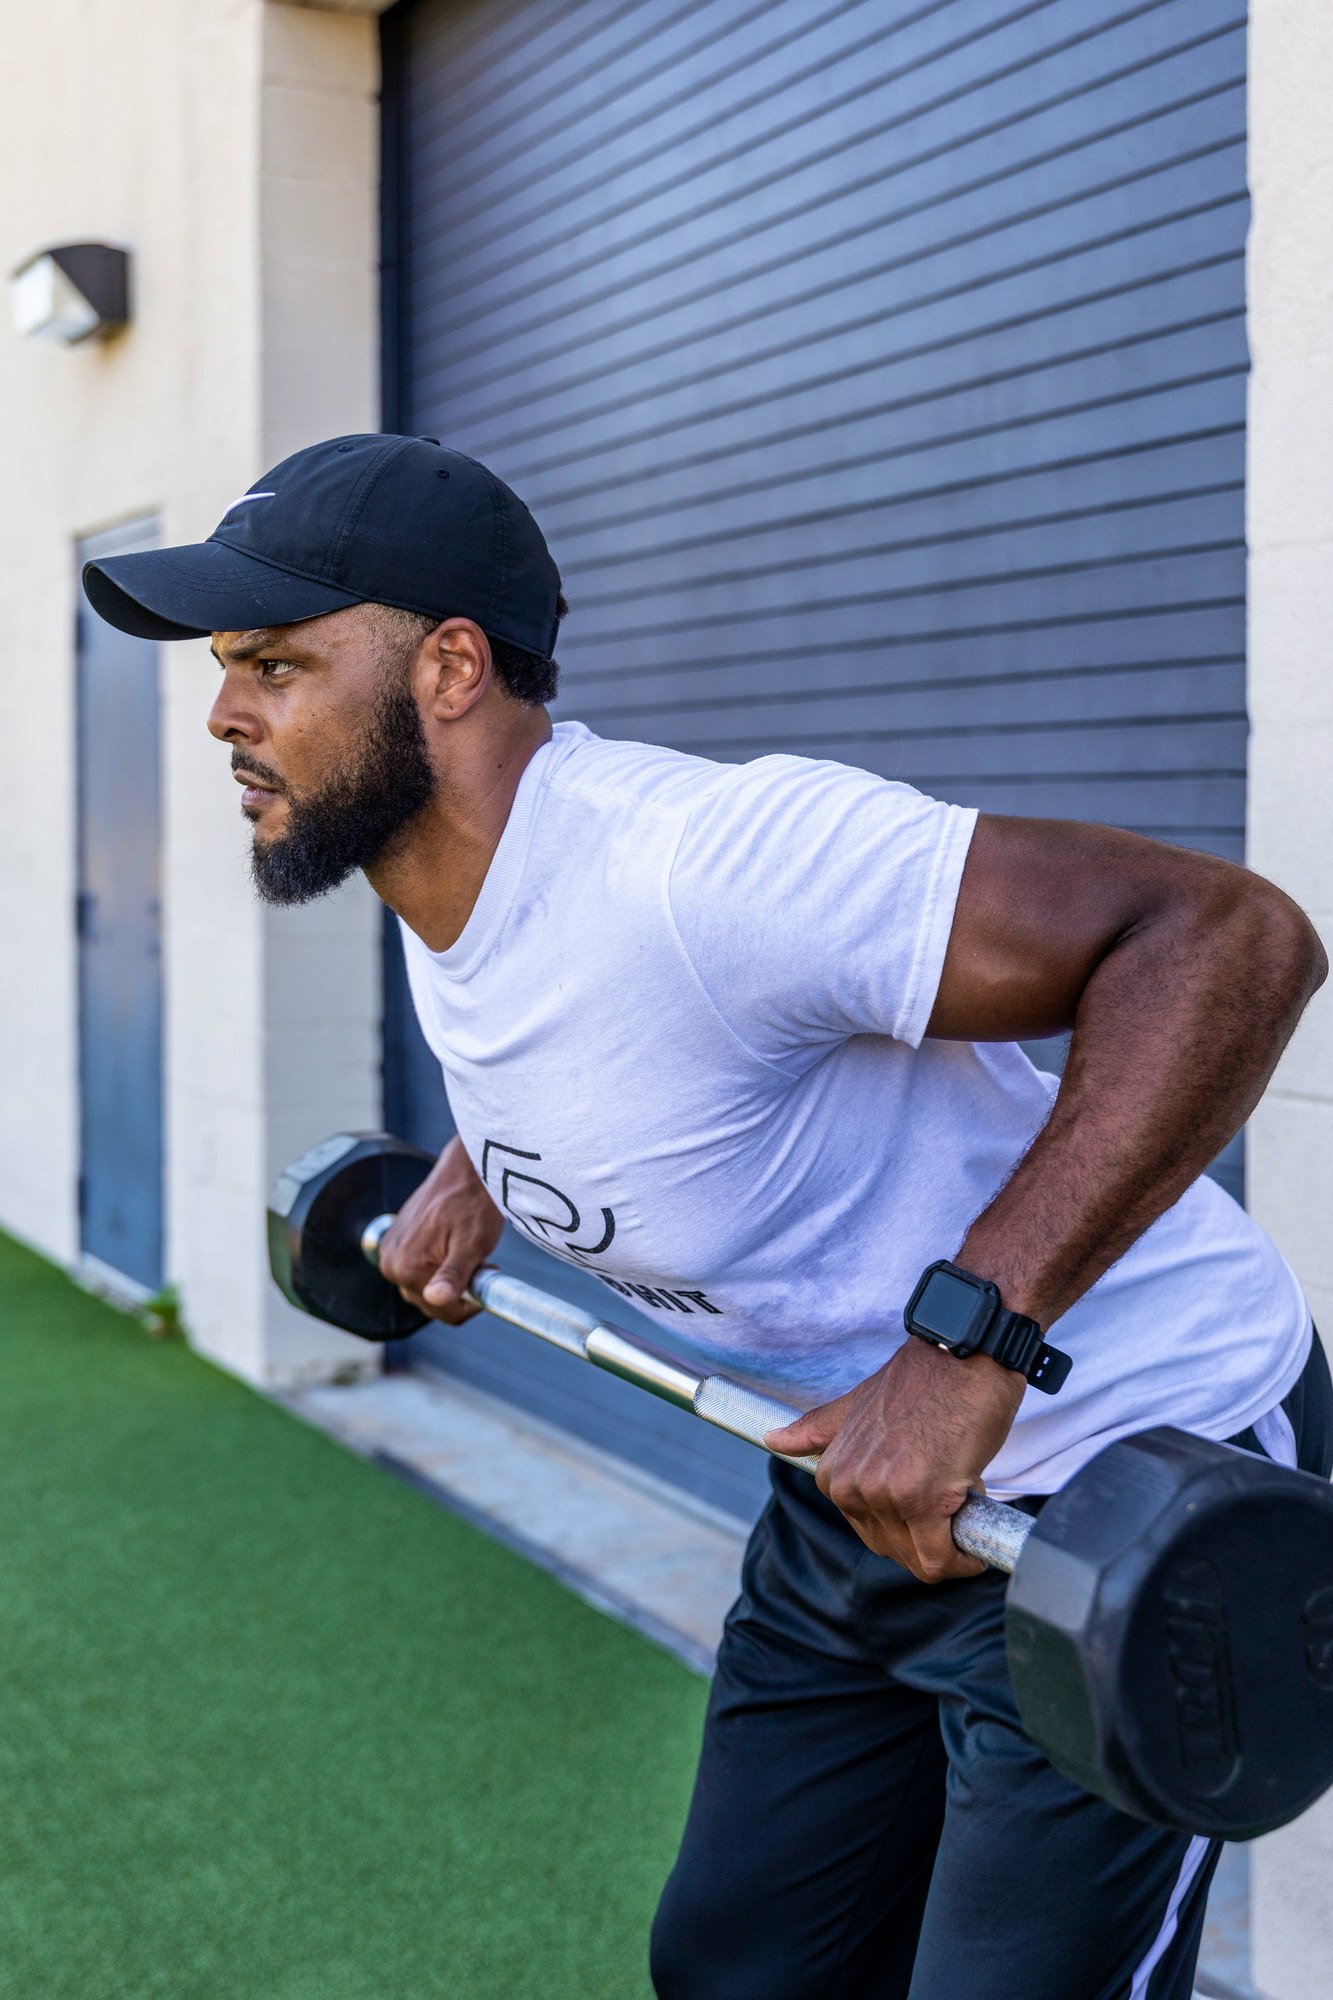 Dex S. Personal Trainer in Dallas, TX with FitnessTrainer